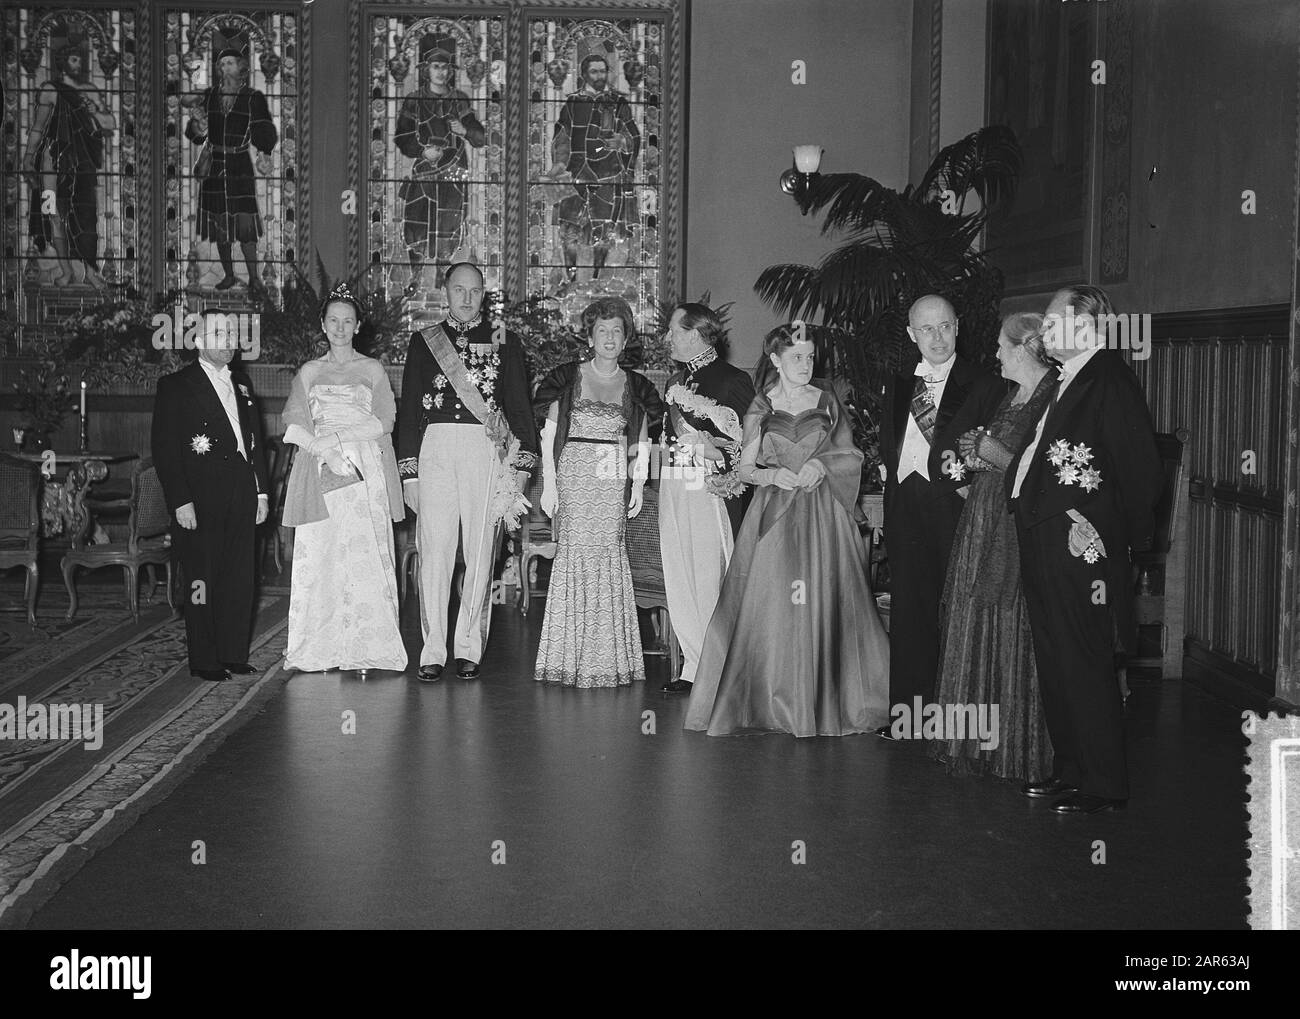 State visit French President Coty to the Netherlands. Government dinner Rijksmuseum Amsterdam. The hosts with their spouses: from right to left: Prime Minister Willem Drees, Deputy Prime Minister Louis Beel, Minister of Foreign Affairs Joseph Luns and Minister of Education Jo Cals. Date: 23 July 1954 Location: Amsterdam, Noord-Holland Keywords: diners, royal house, presidents Institution name: Rijksmuseum Stock Photo